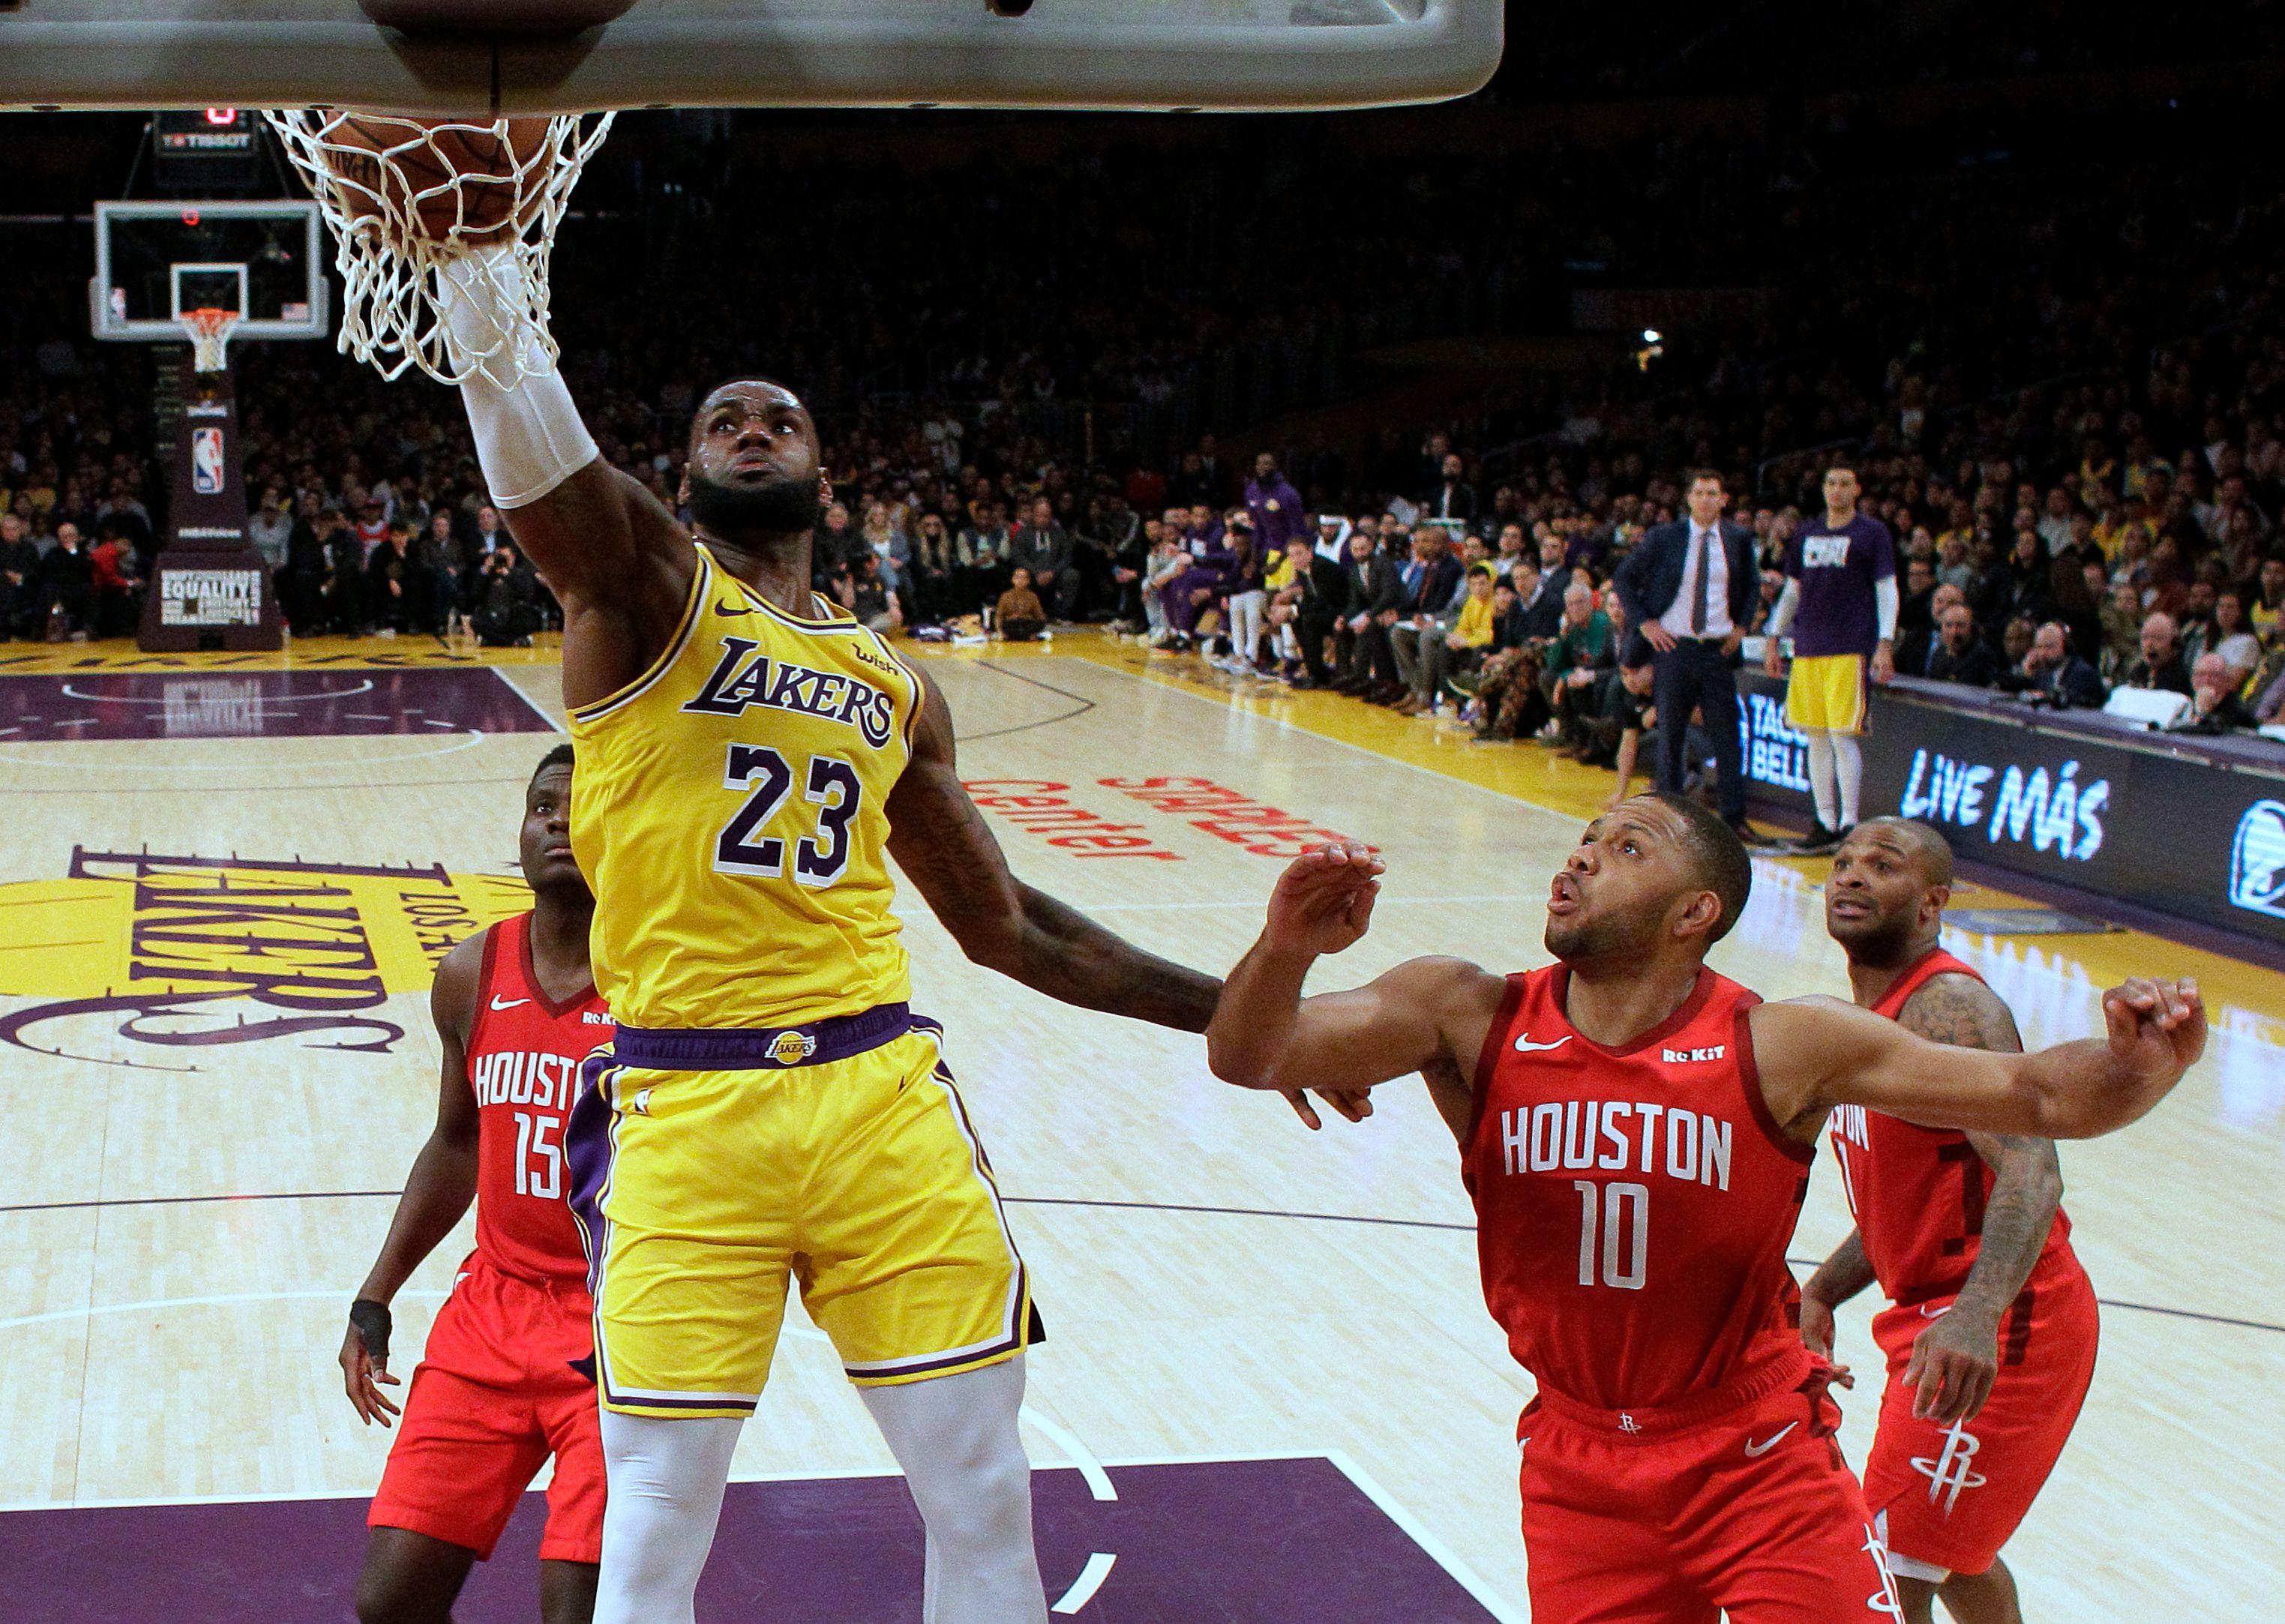 LeBron rallies Lakers to 111-106 victory over Rockets The Seattle Times